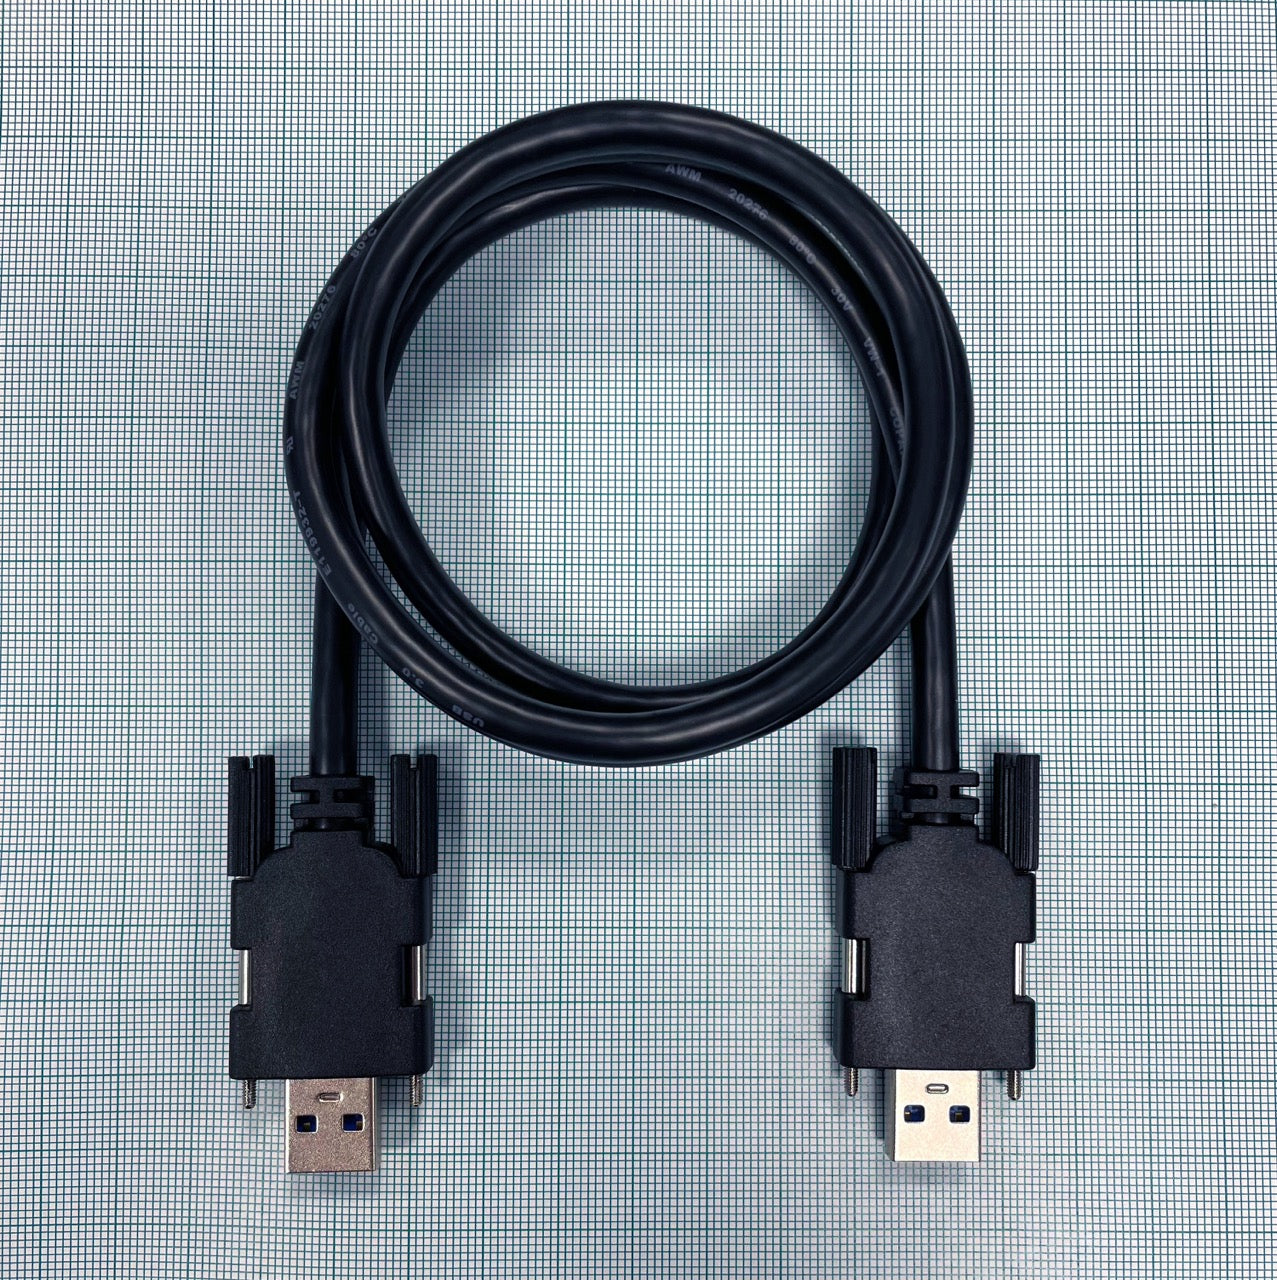 USB 3.0 5Gbps Industrial Screw Locking Cable Type A to Type A, for connecting the MATT Robot to the computer